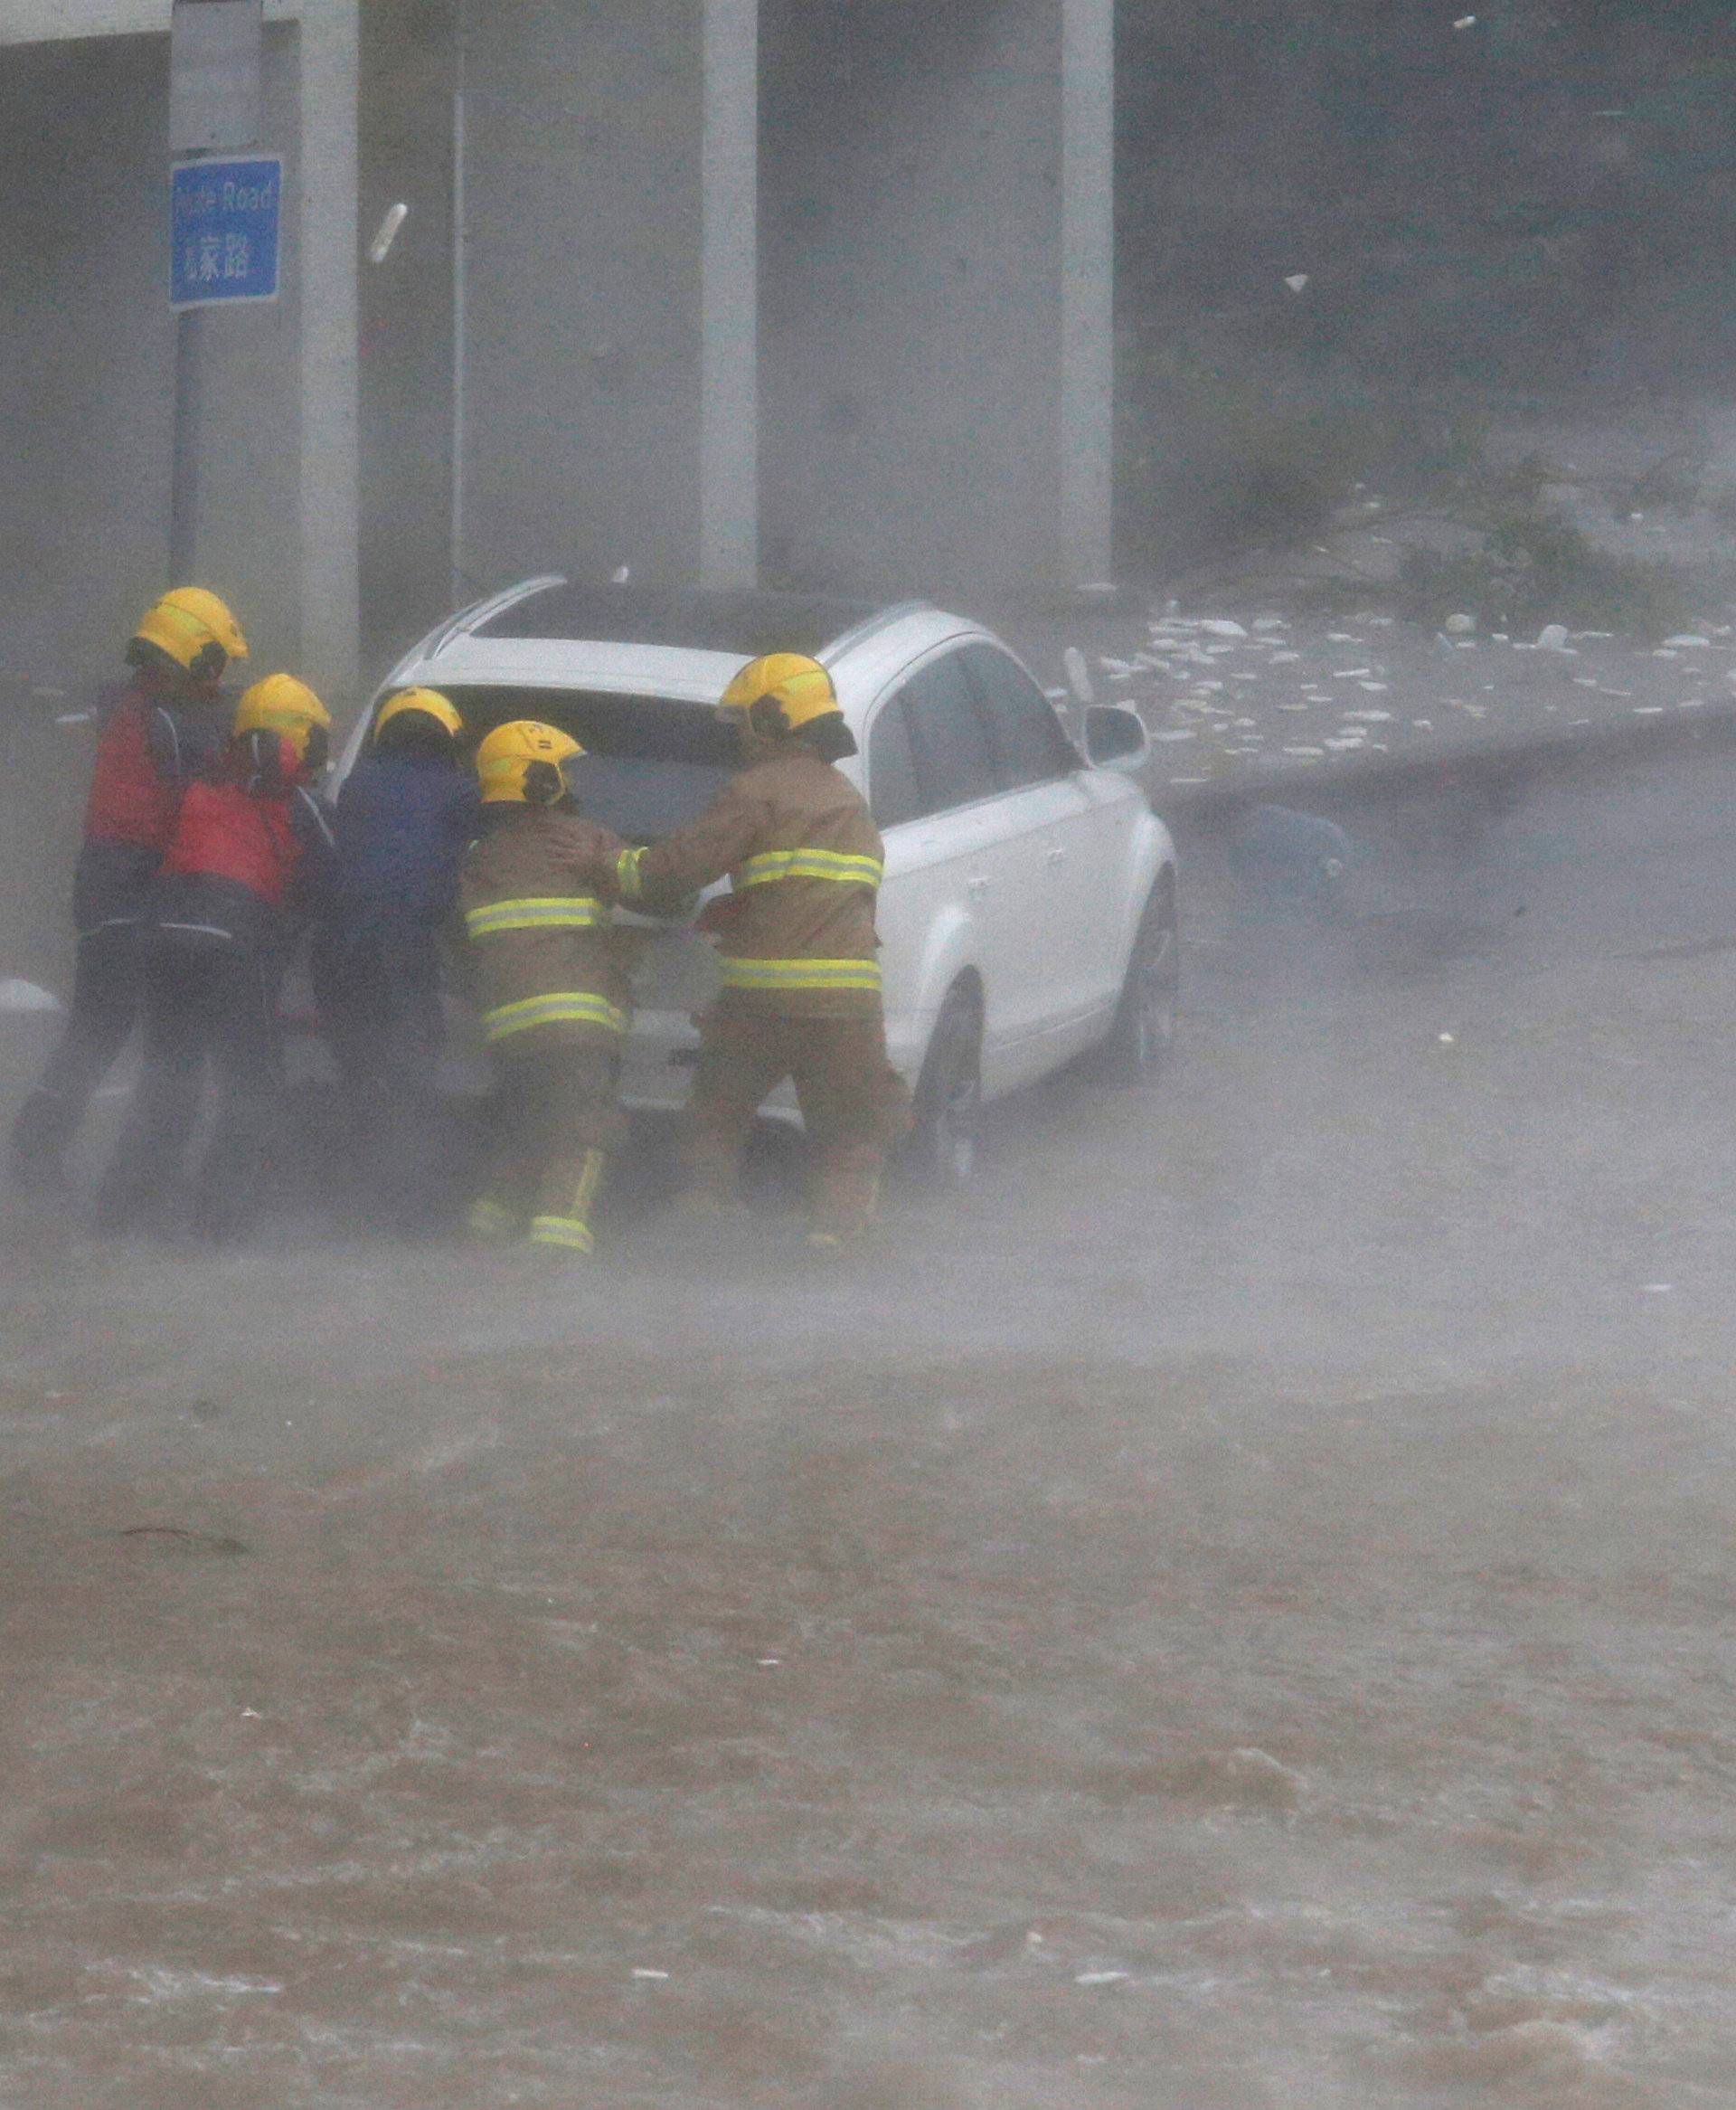 Firefighters push a car in flooded waters as high waves hit the shore at Heng Fa Chuen, a residental district near the waterfront, as Typhoon Mangkhut slams Hong Kong